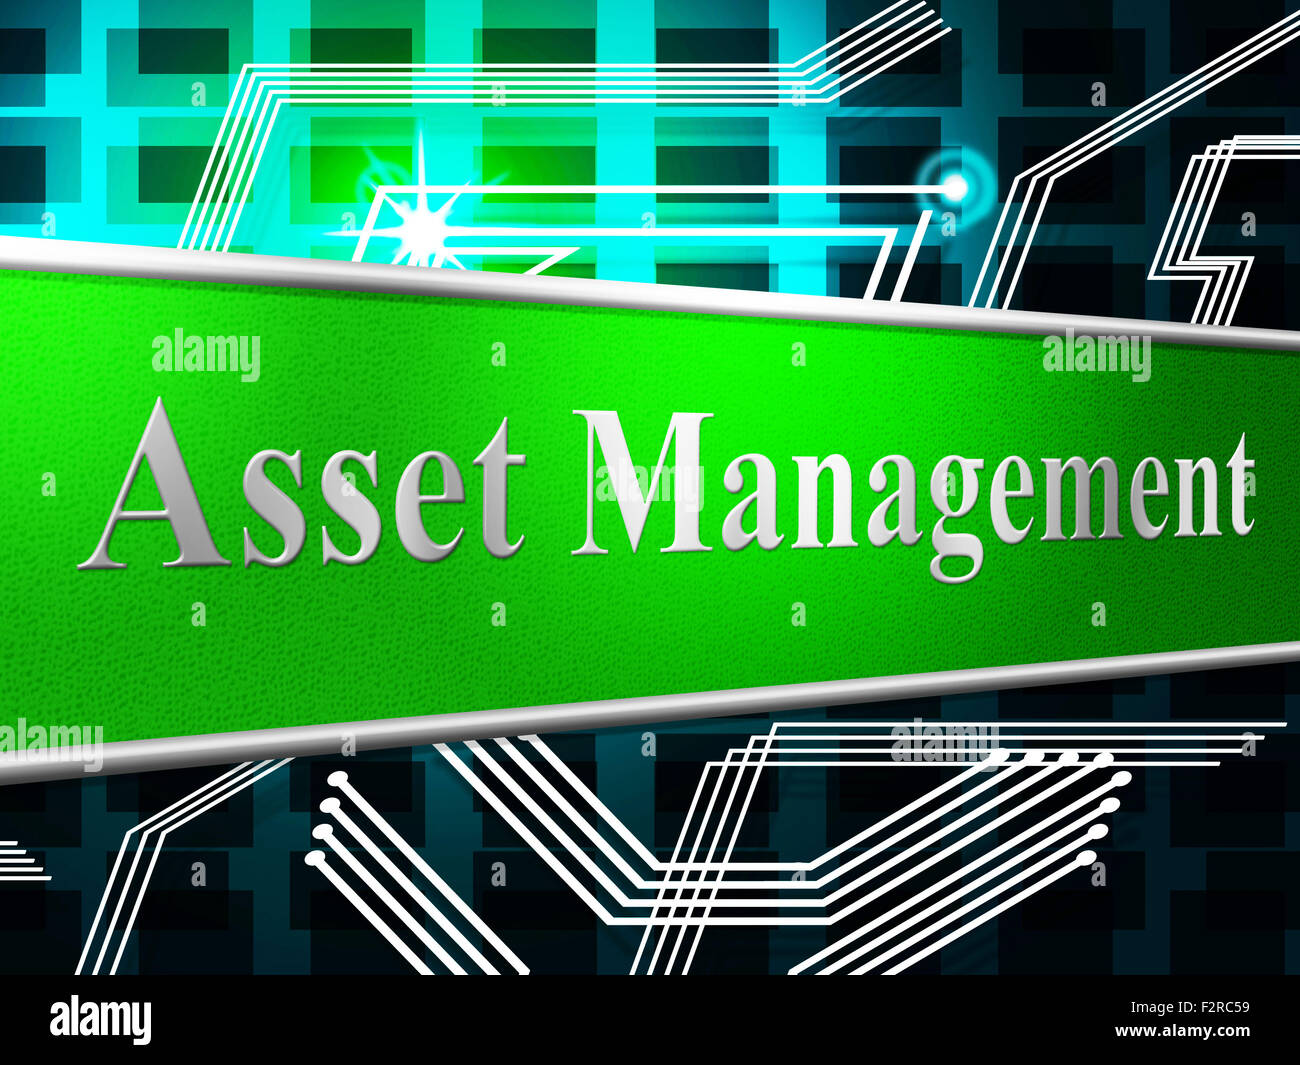 Asset Management Meaning Administration Authority And Company Stock Photo